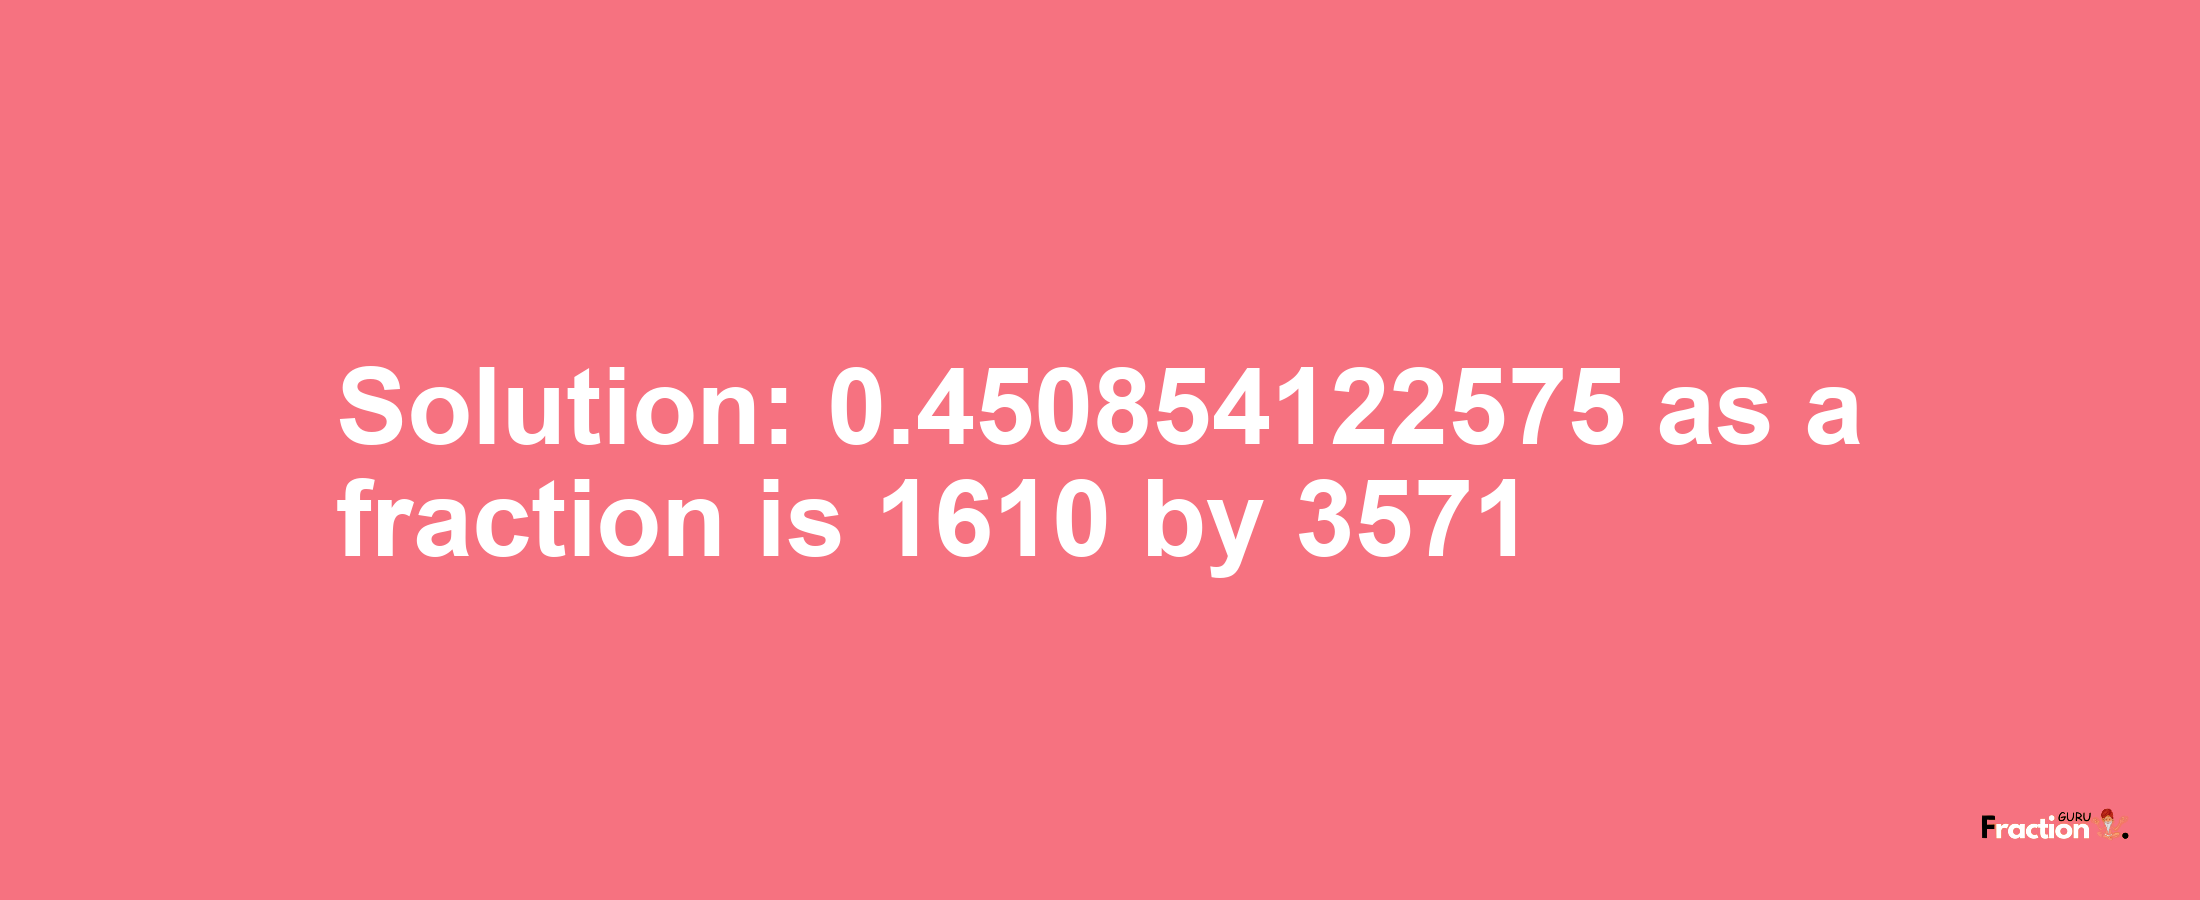 Solution:0.450854122575 as a fraction is 1610/3571